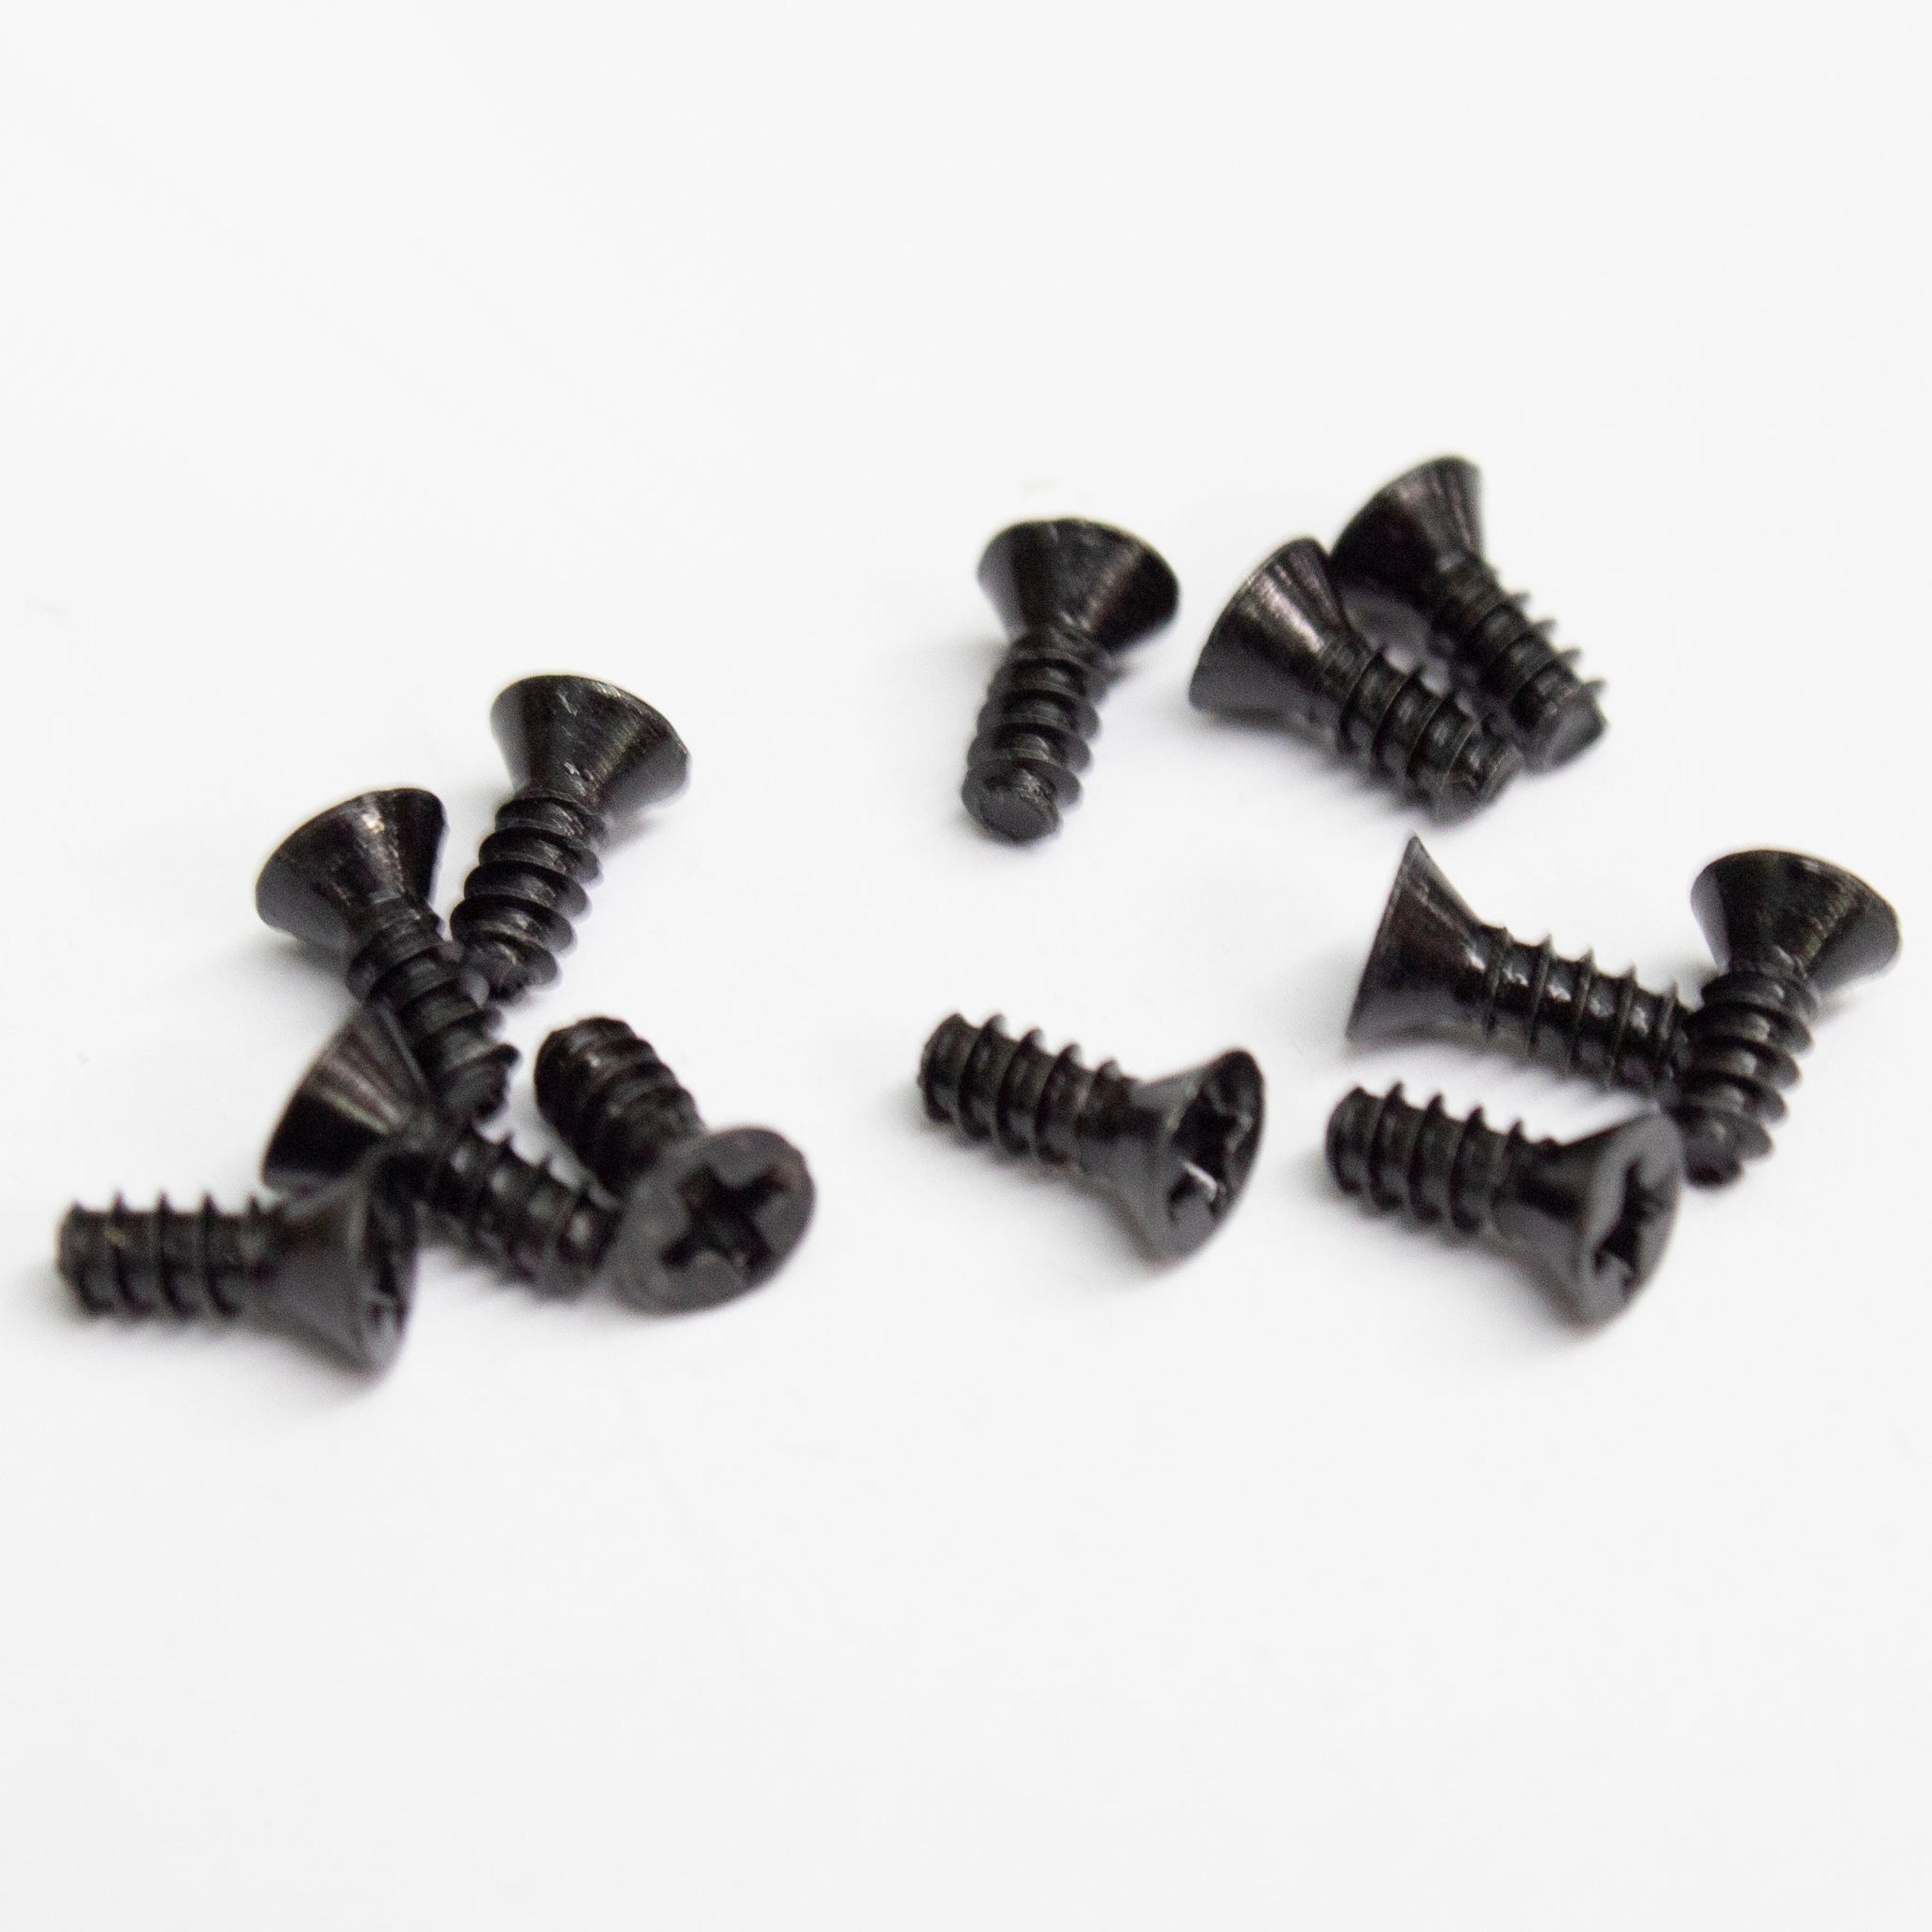 IMEX Countersunk Self Tapping Screws (12 pc)(2.3x6mm)